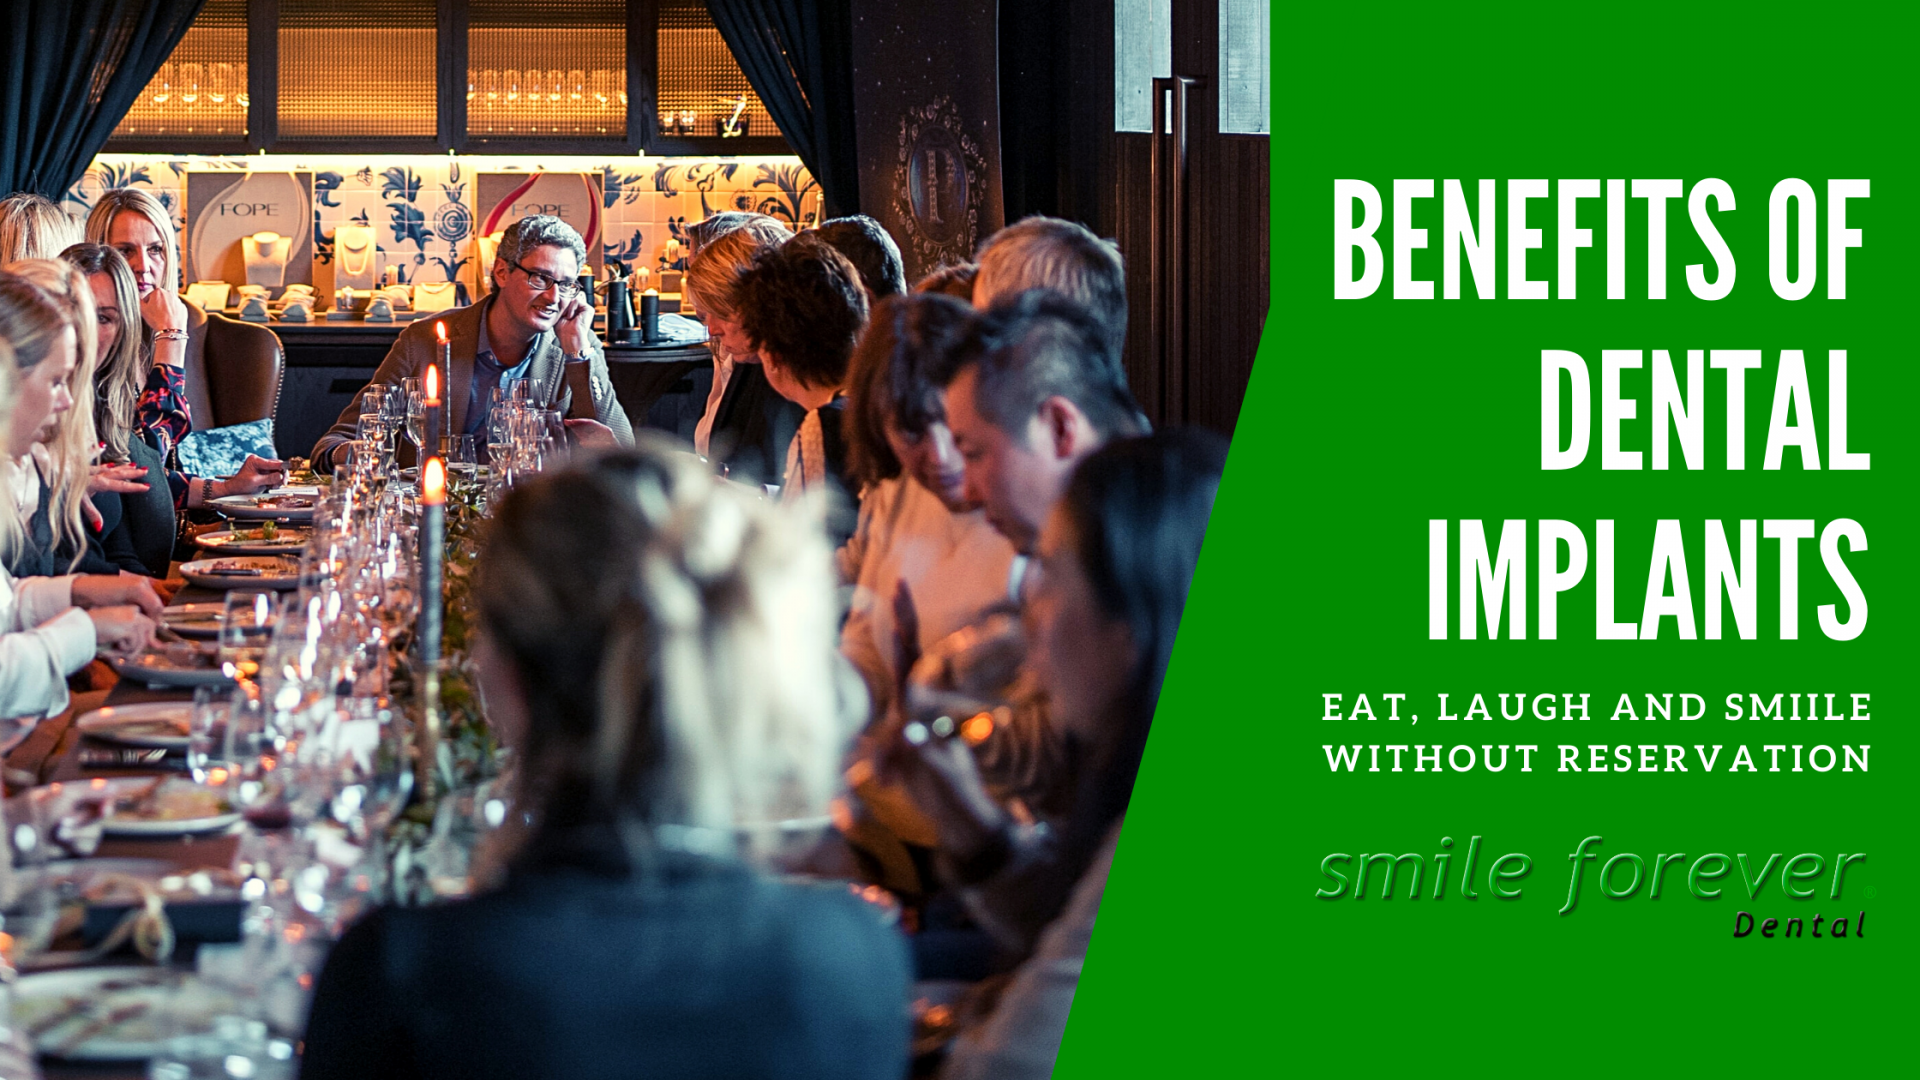 Eat, Laugh, Smile with Dental Implants